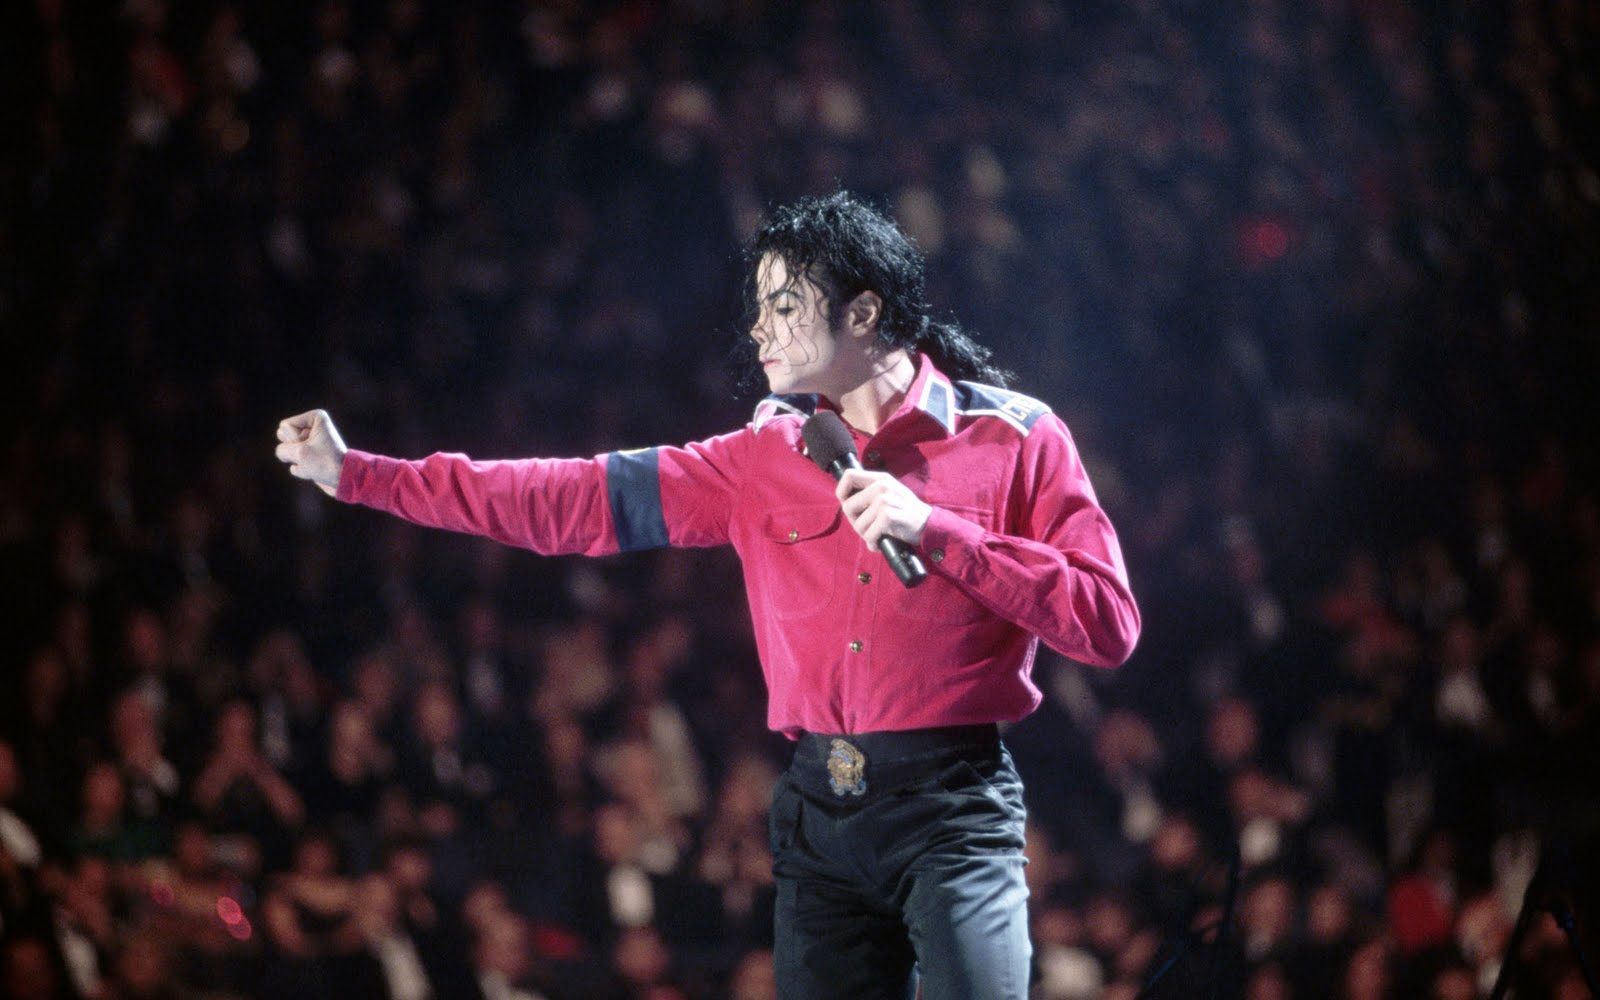 michael jackson images wallpapers,performance,music artist,singer,event,performing arts